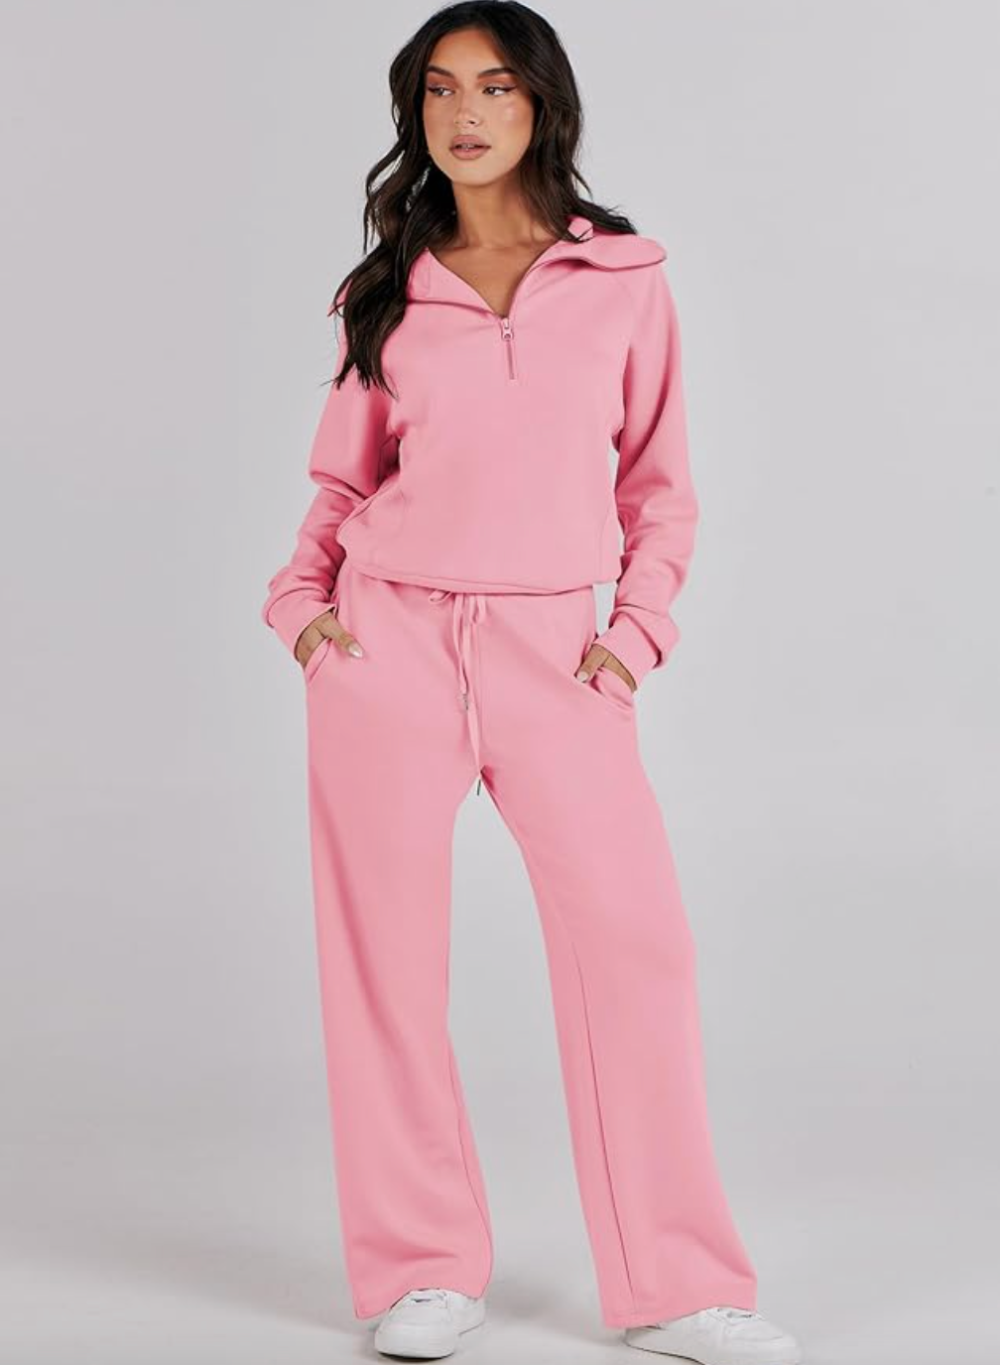 Just Dropped This Two-Piece Jogger Set — And I Plan to Live In It